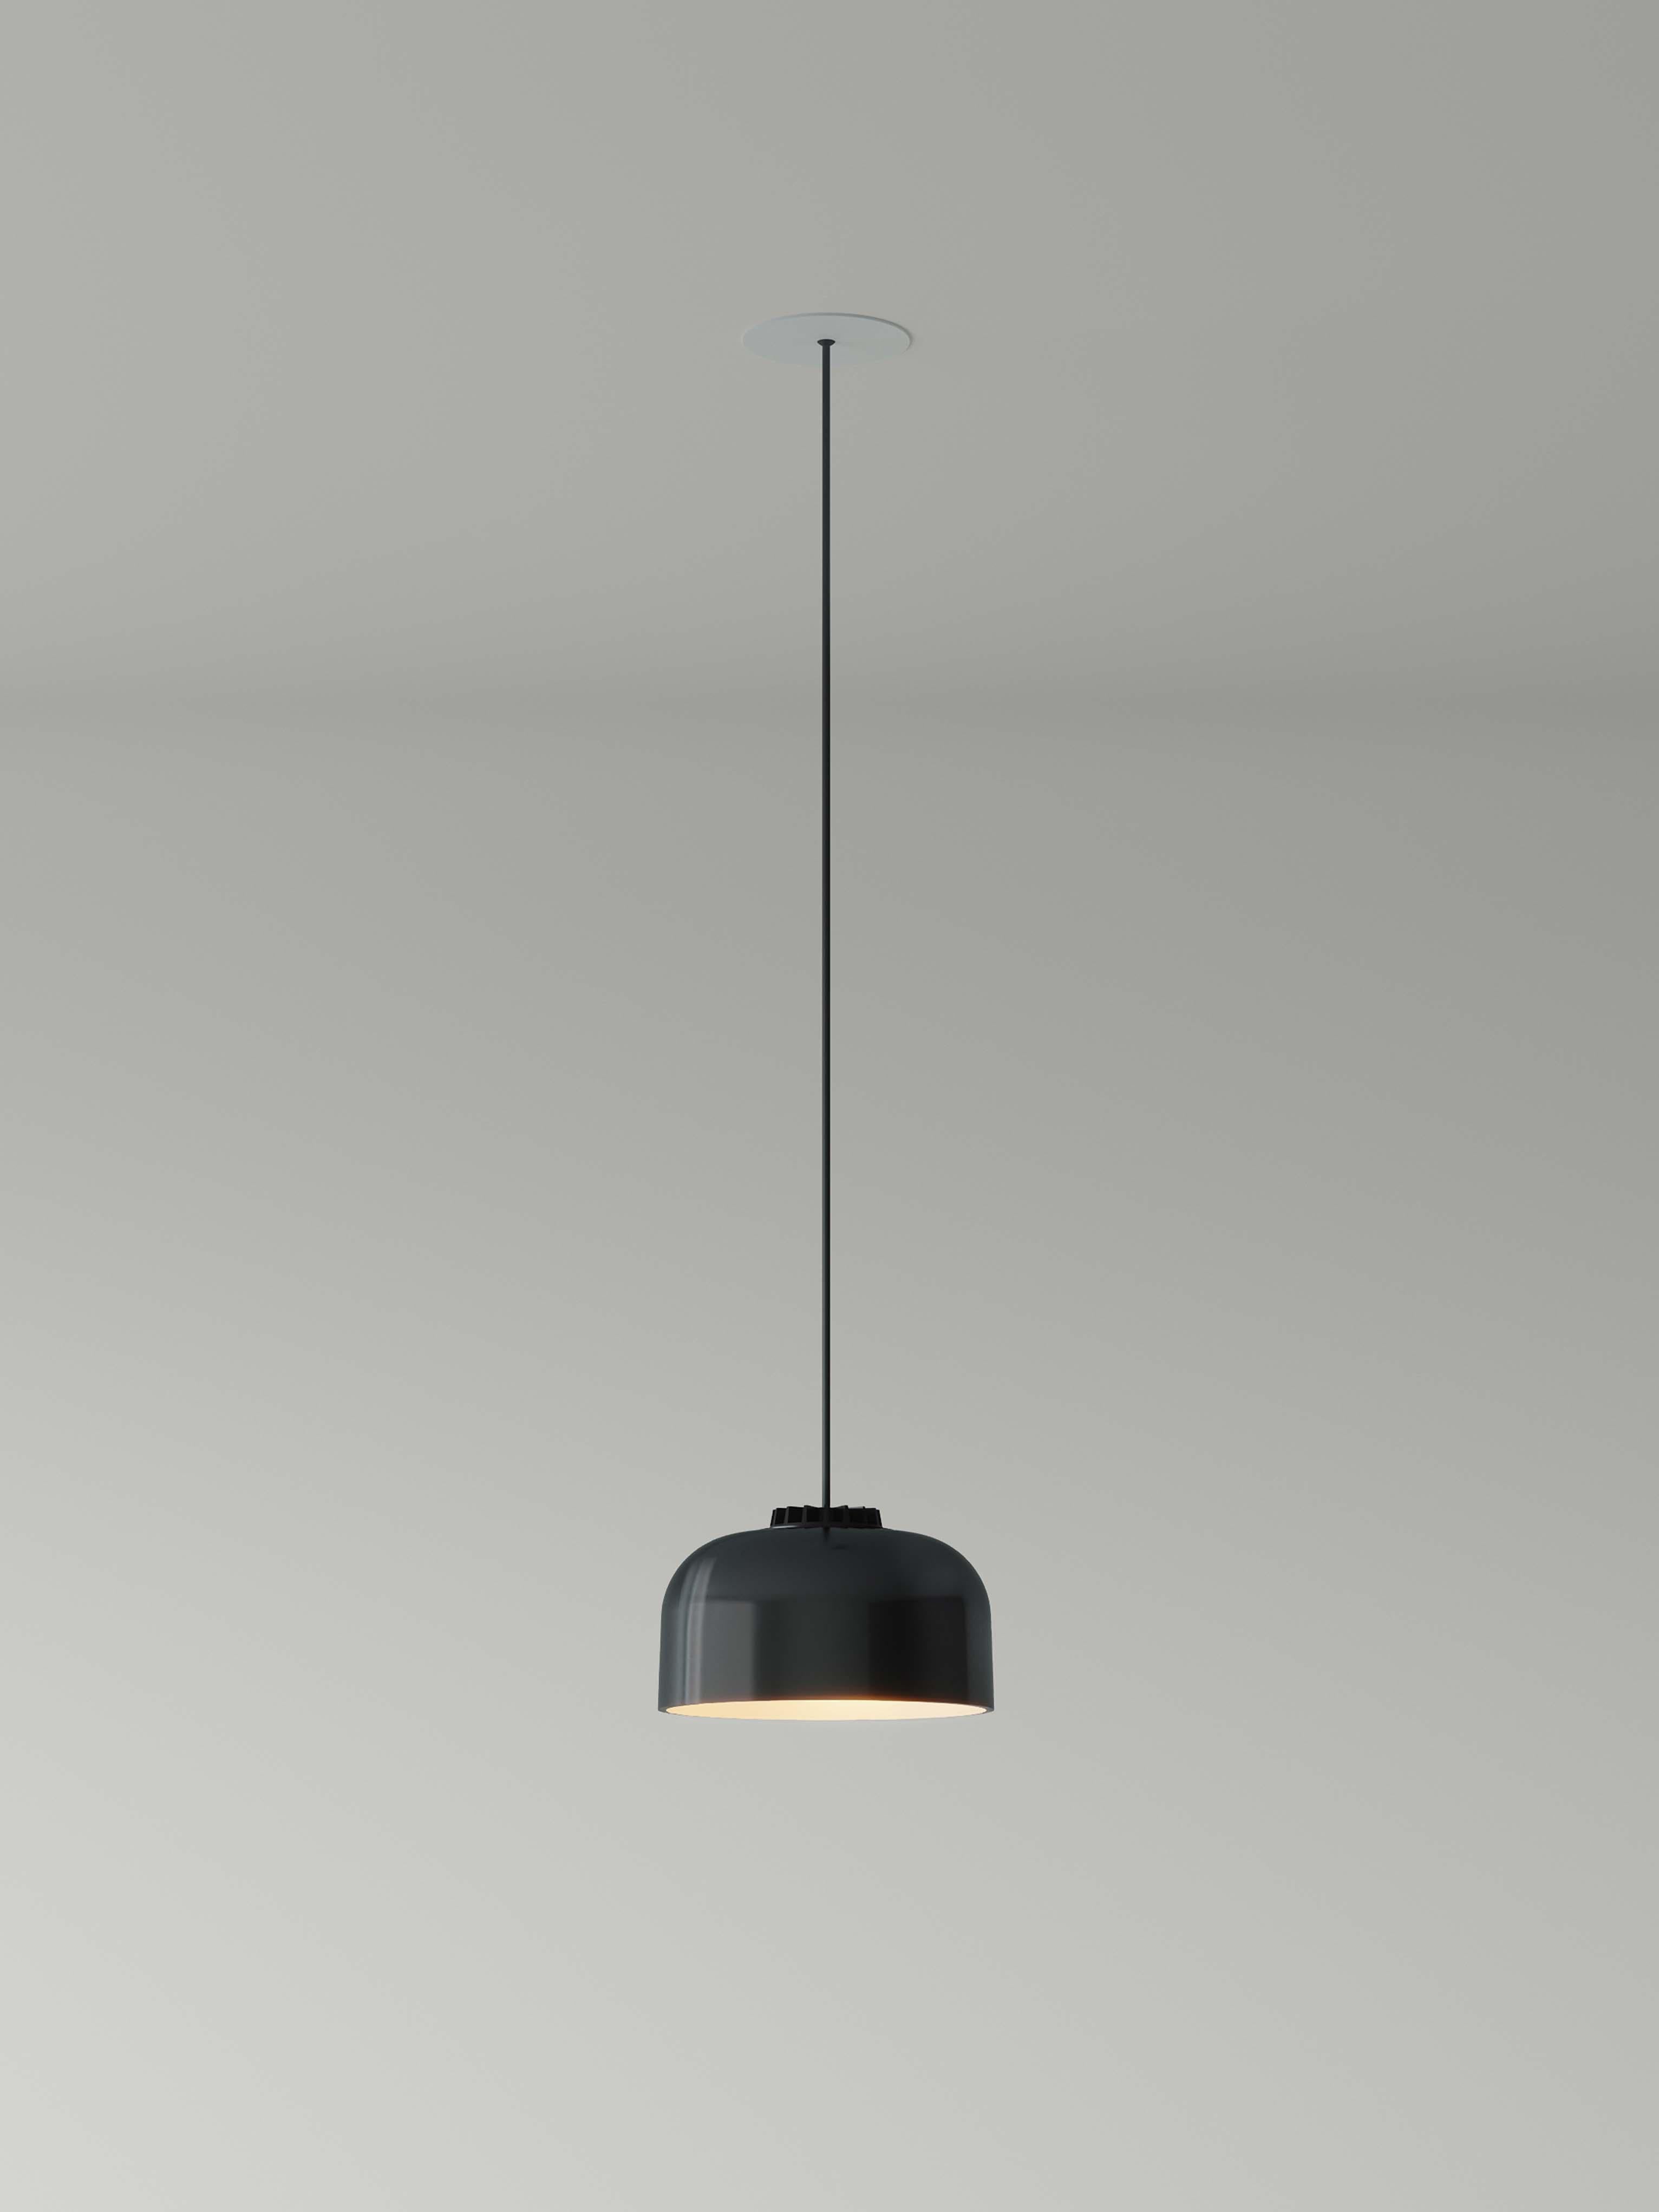 Large black headhat bowl pendant lamp by Santa & Cole
Dimensions: D 20 x H 12 cm
Materials: Metal, ceramic.
Cable lenght: 3mts.
Available in white or black ceramic. Available in 2 cable lengths: 3mts, 8mts.
Availalble in 2 canopy colors: Black